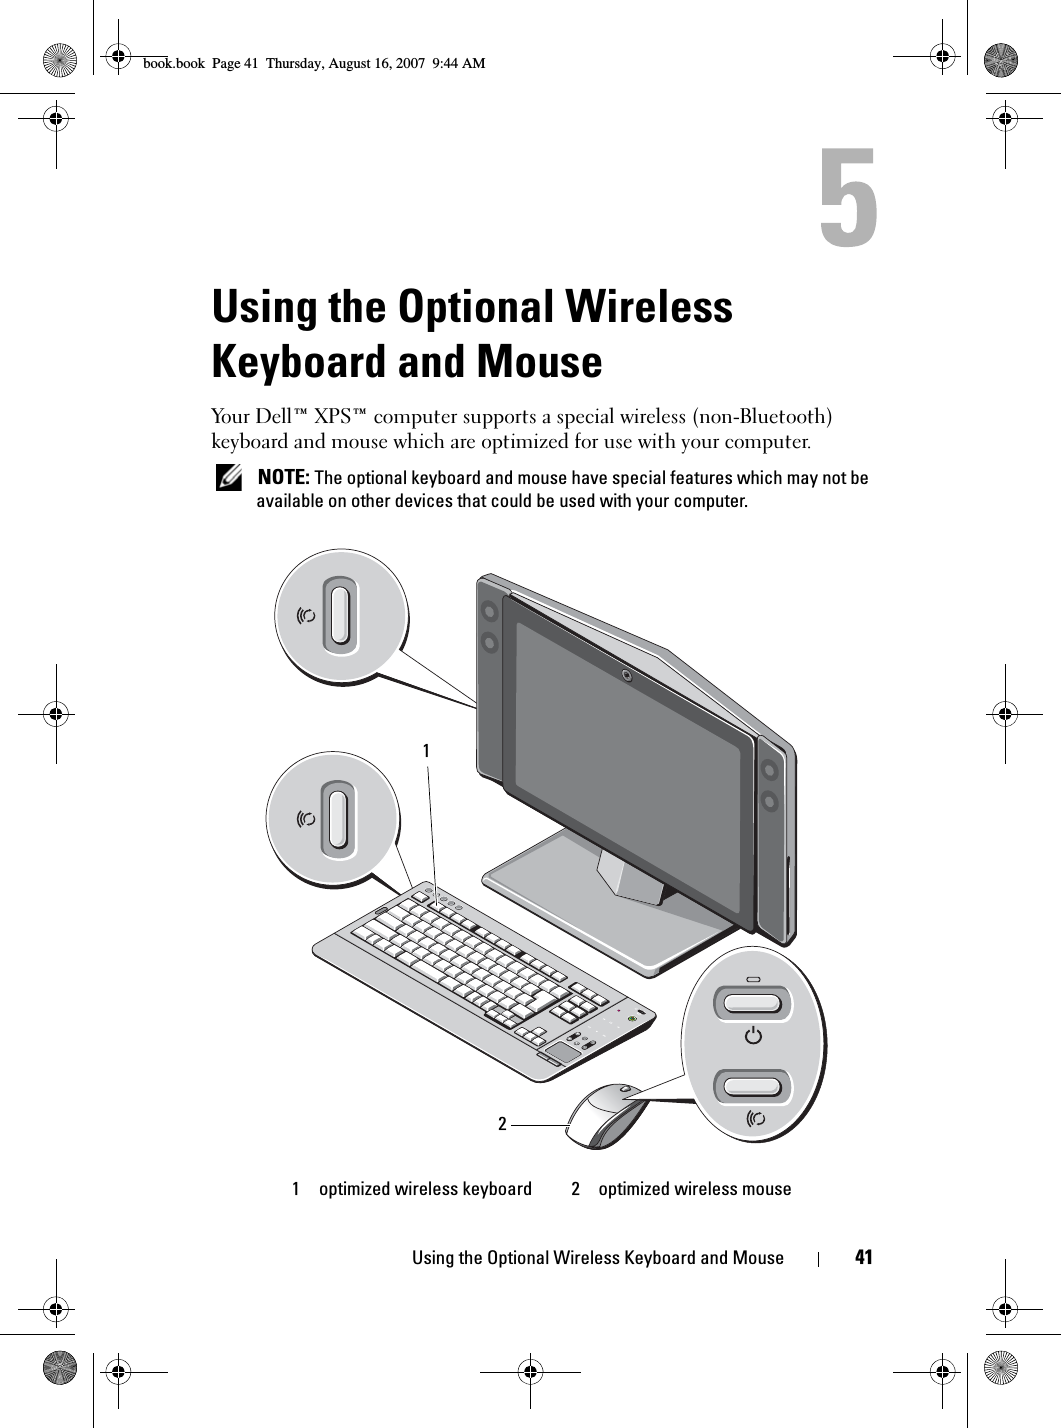 Using the Optional Wireless Keyboard and Mouse 41Using the Optional Wireless Keyboard and MouseYour Dell™ XPS™ computer supports a special wireless (non-Bluetooth) keyboard and mouse which are optimized for use with your computer.  NOTE: The optional keyboard and mouse have special features which may not be available on other devices that could be used with your computer.1 optimized wireless keyboard 2 optimized wireless mouse21book.book  Page 41  Thursday, August 16, 2007  9:44 AM